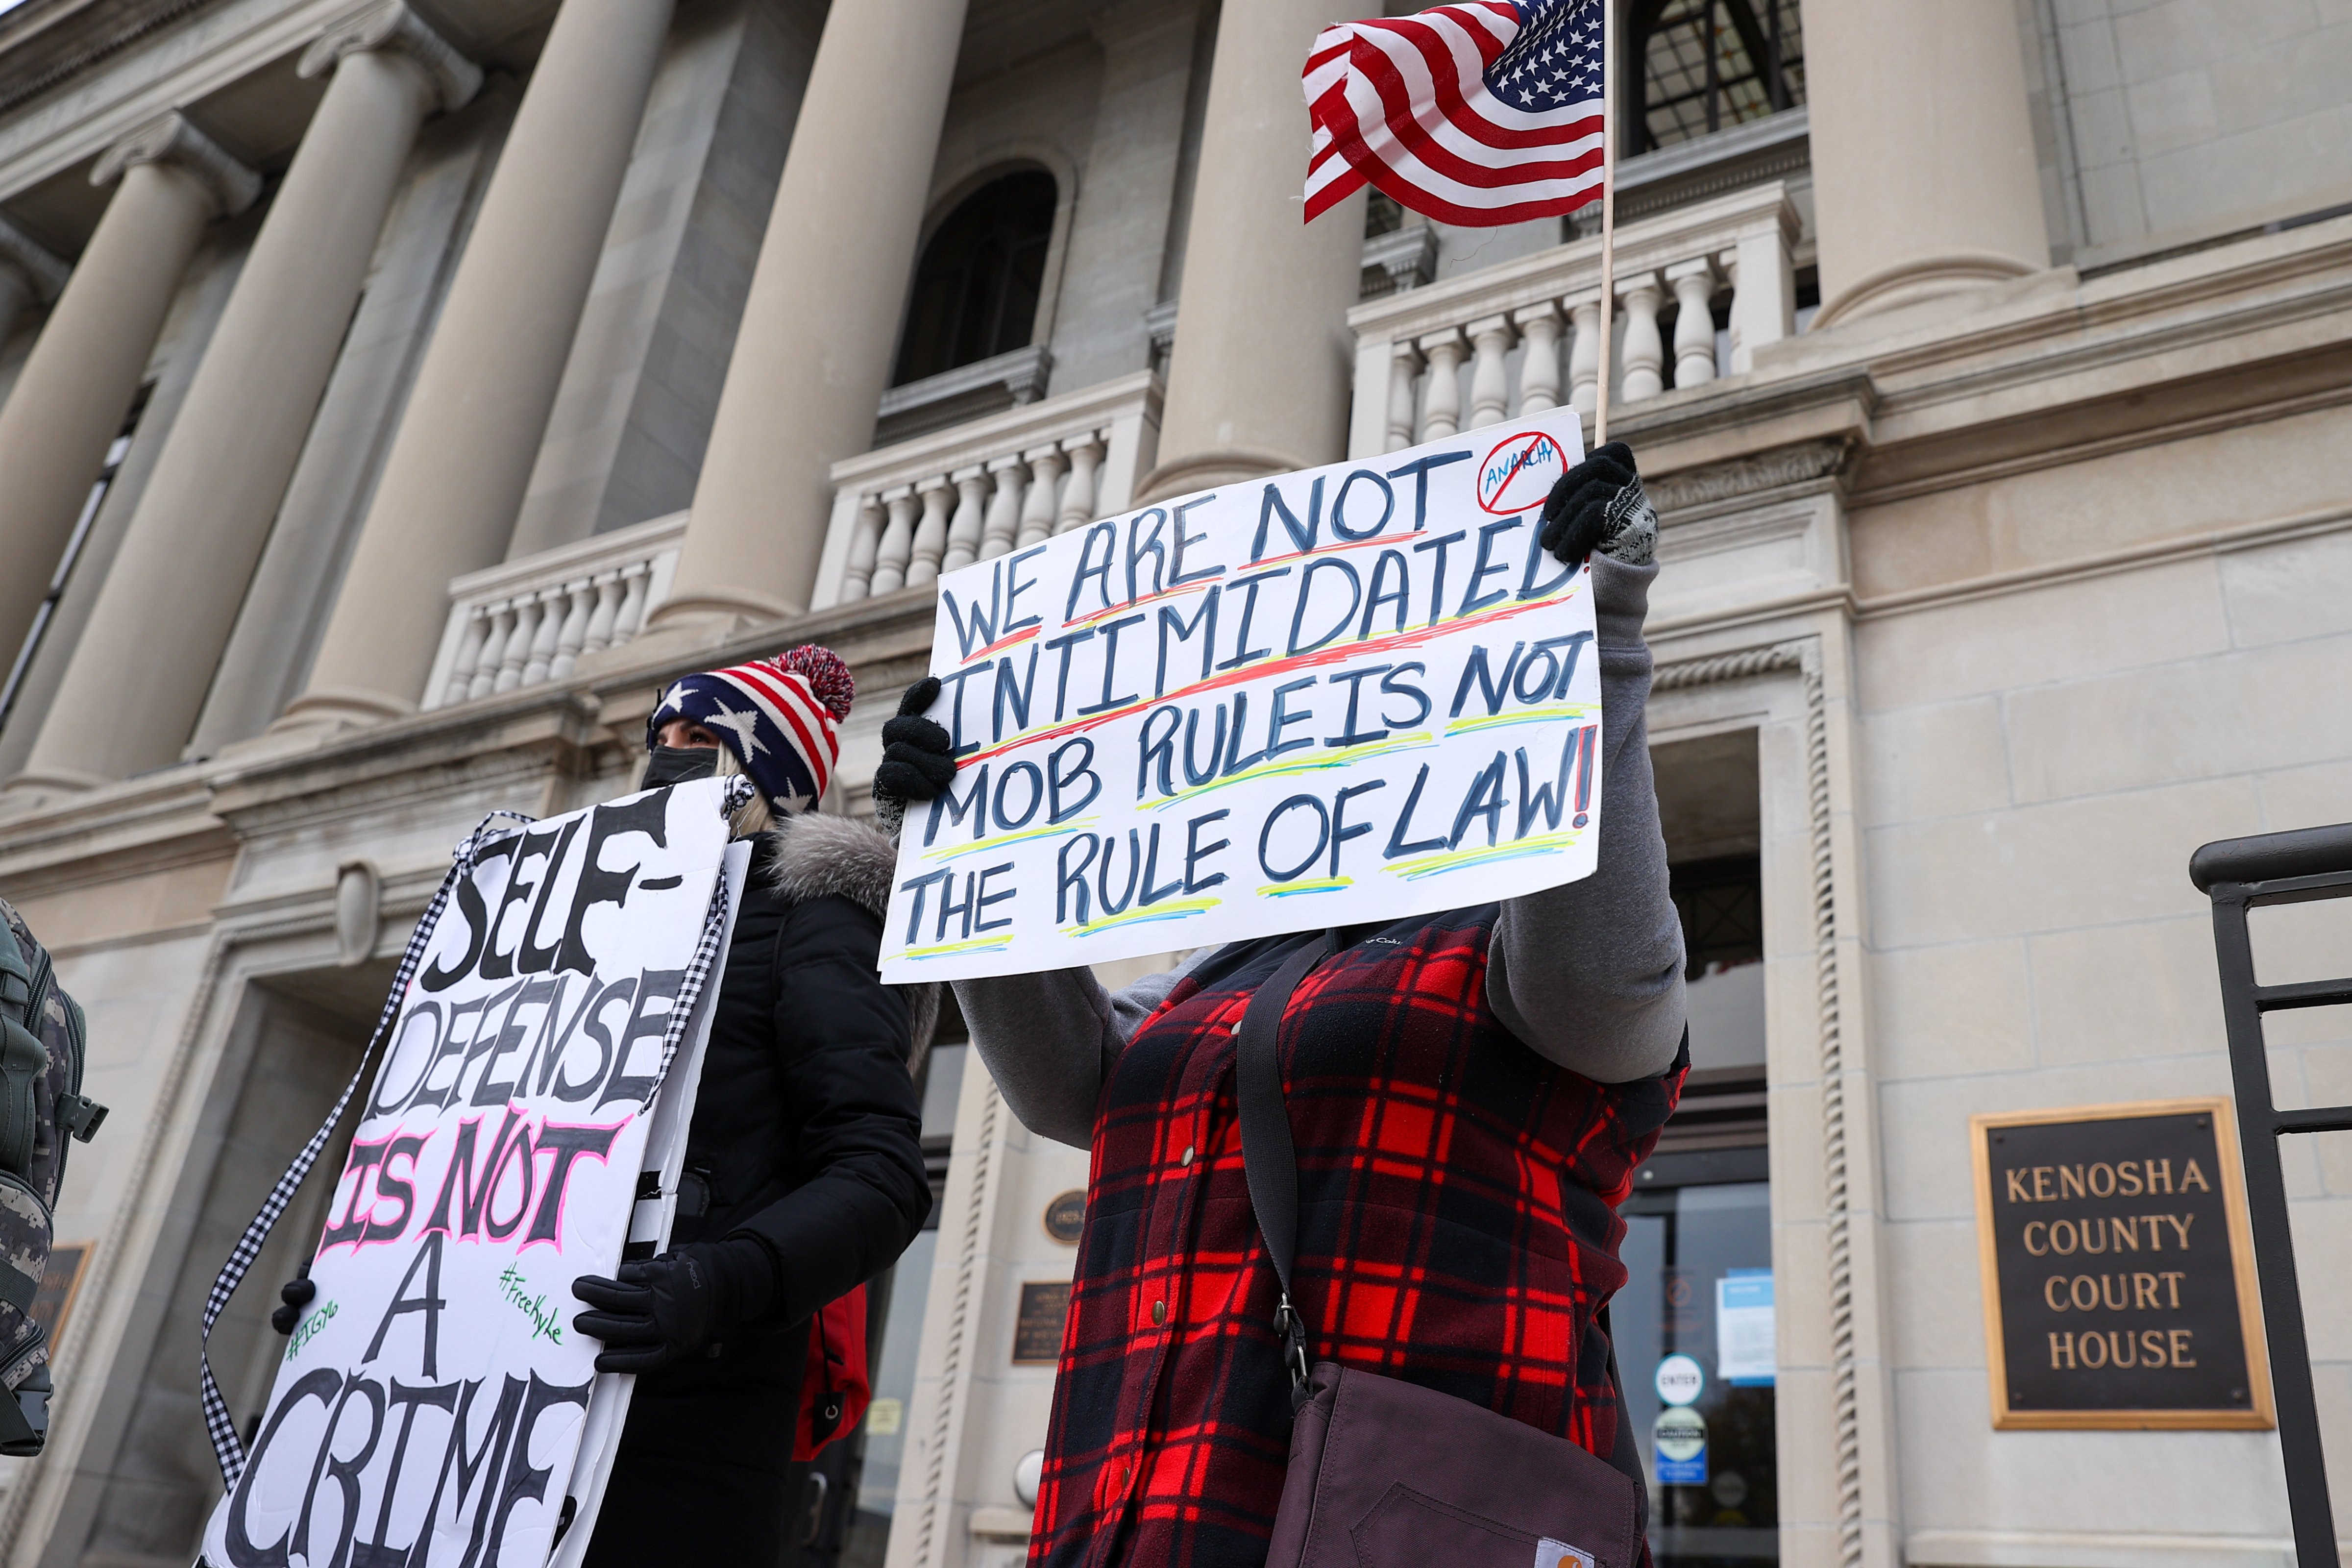 Supporters and opponents of Kyle Rittenhouse hold signs outside the courthouse in Kenosha, Wisc. on Nov. 16, 2021, as jurors deliberate. (Tayfun Coskup—Anadolu Agency/Getty Images)